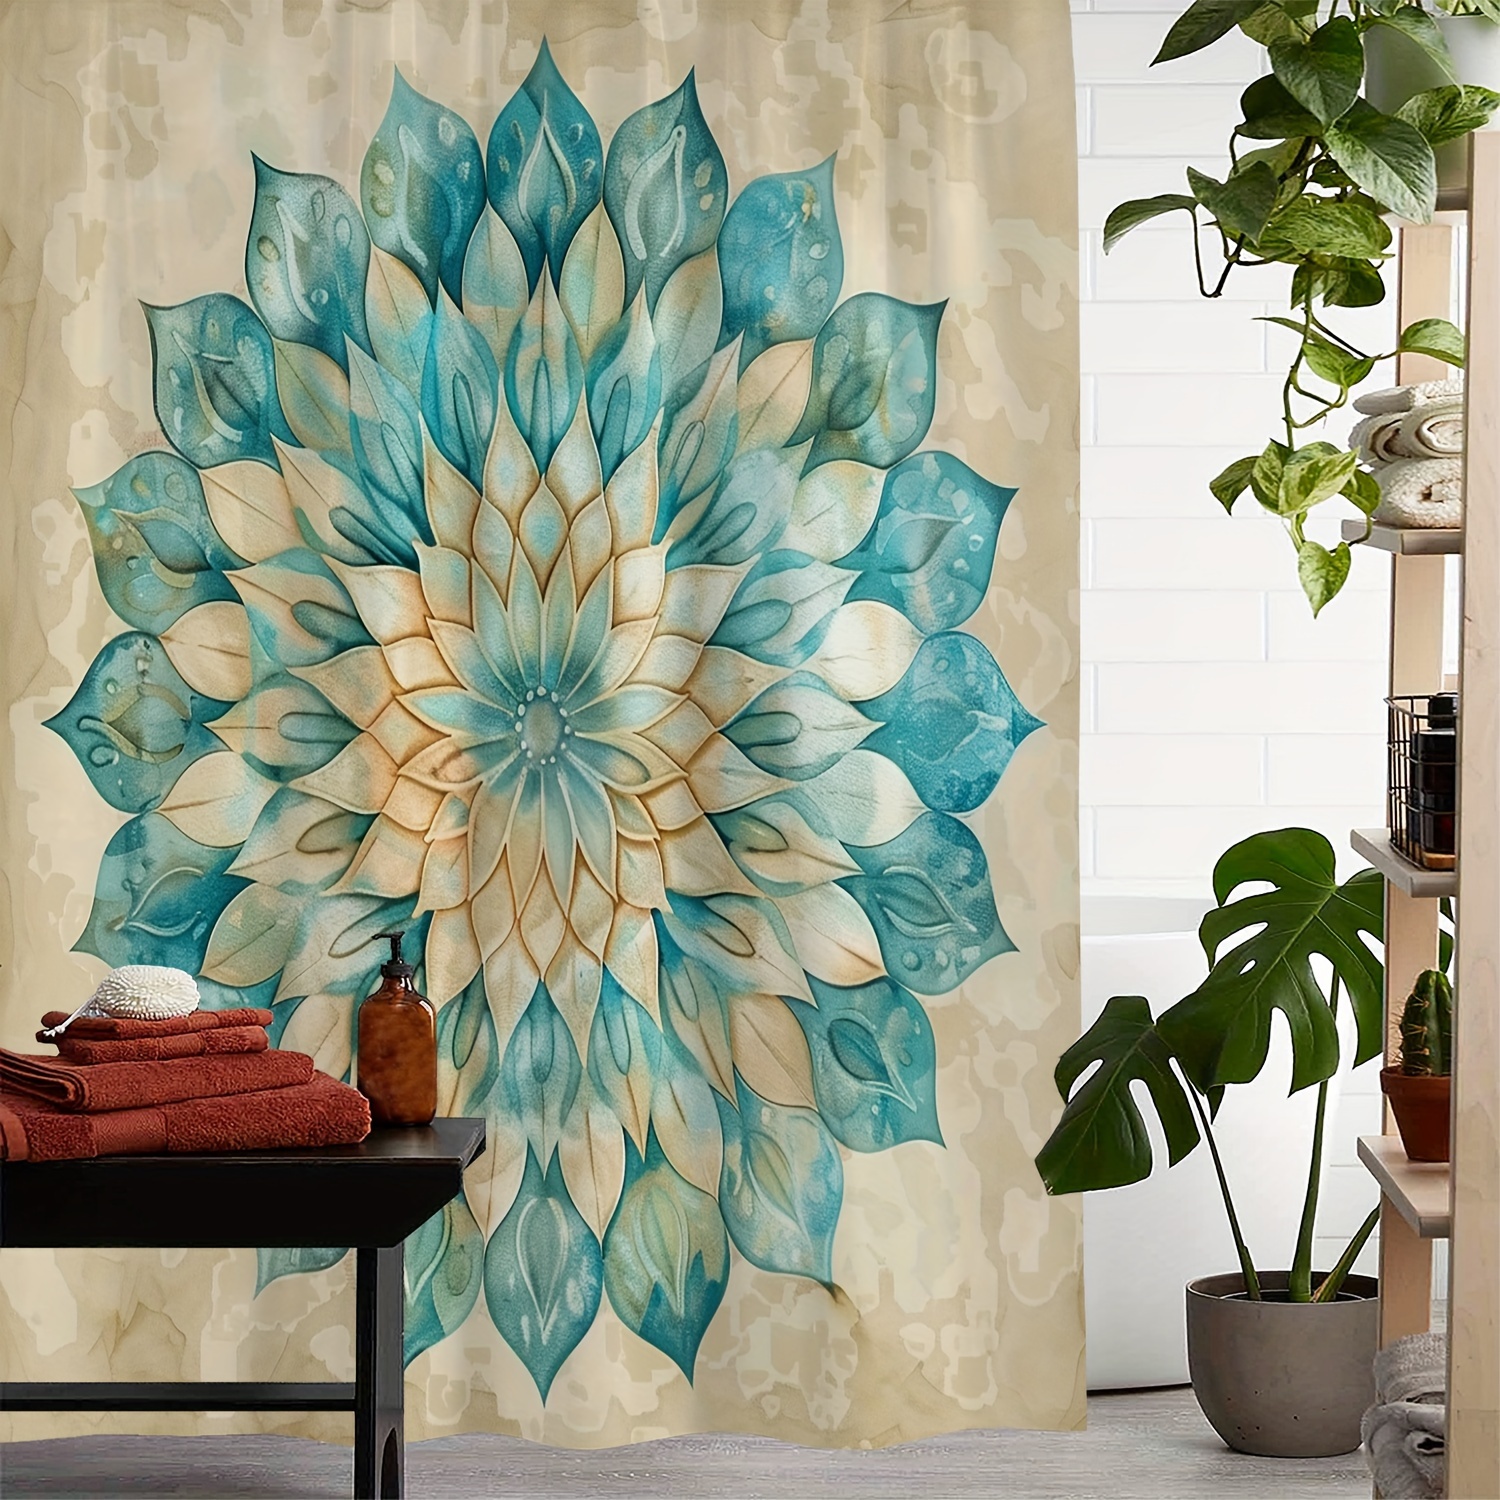 

1pc Vintage Mandala Print Waterproof Shower Curtain With 12 Hooks, 72x72 Inches, Versatile Use As Curtain For Windows, Blue & Beige Artistic Design For Bathroom Decor